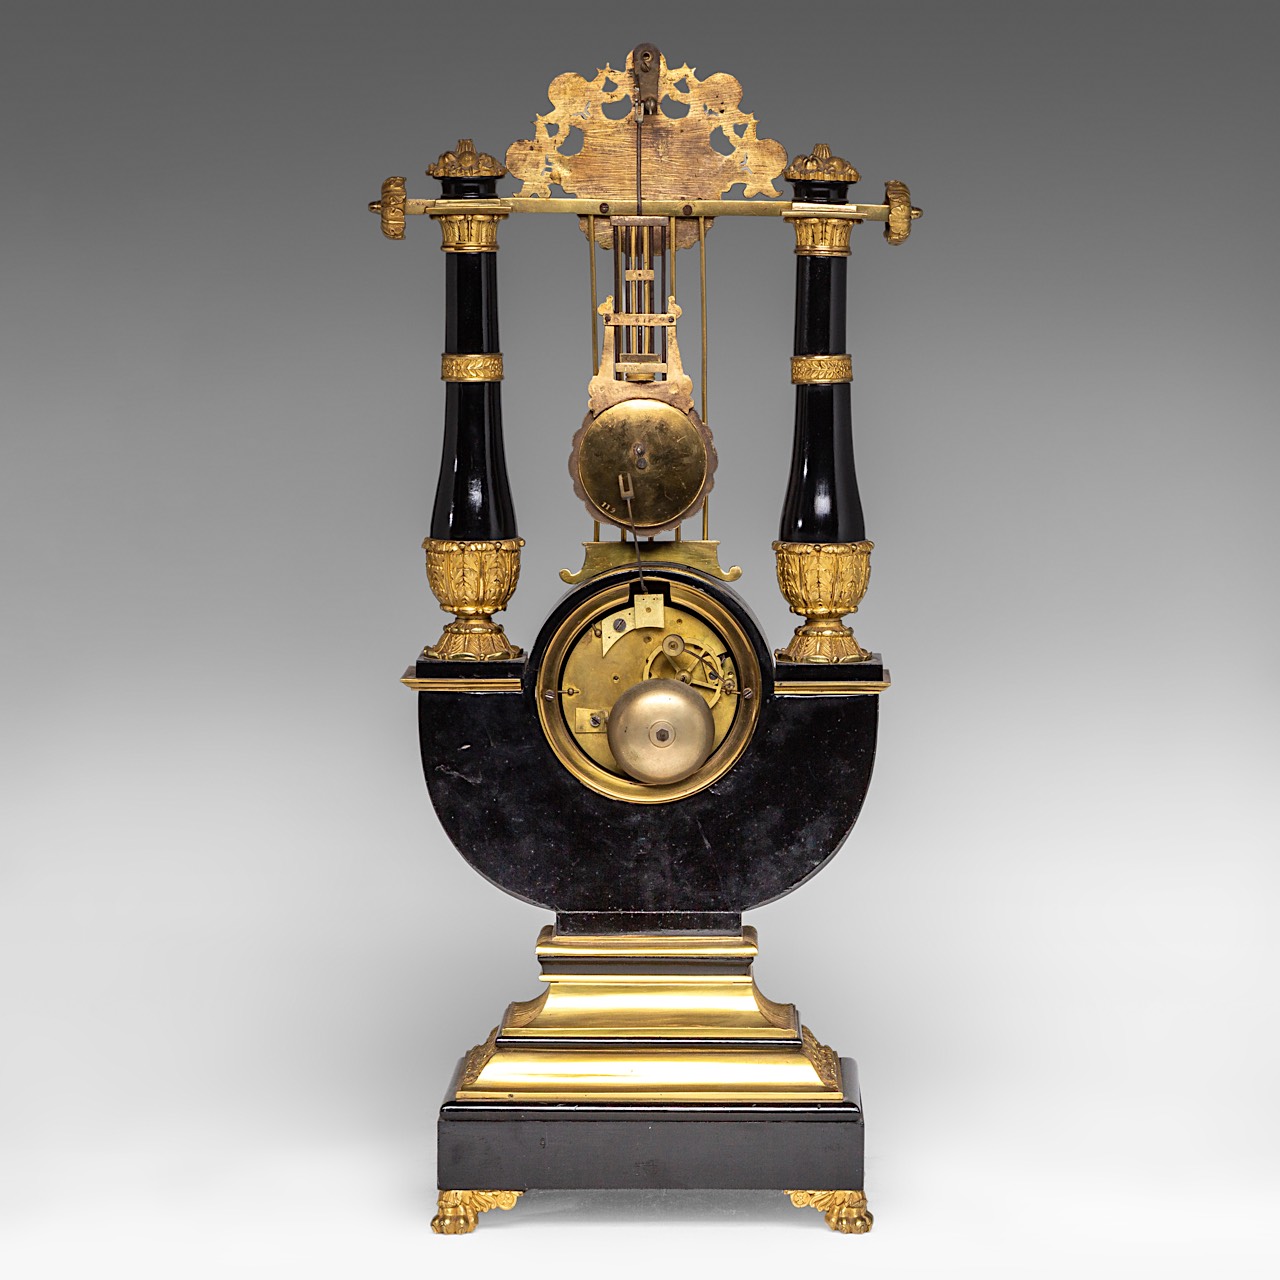 A French Restoration black lacquered and gilt bronze mounted lyre-shaped mantle clock, H 58 cm - Image 4 of 8